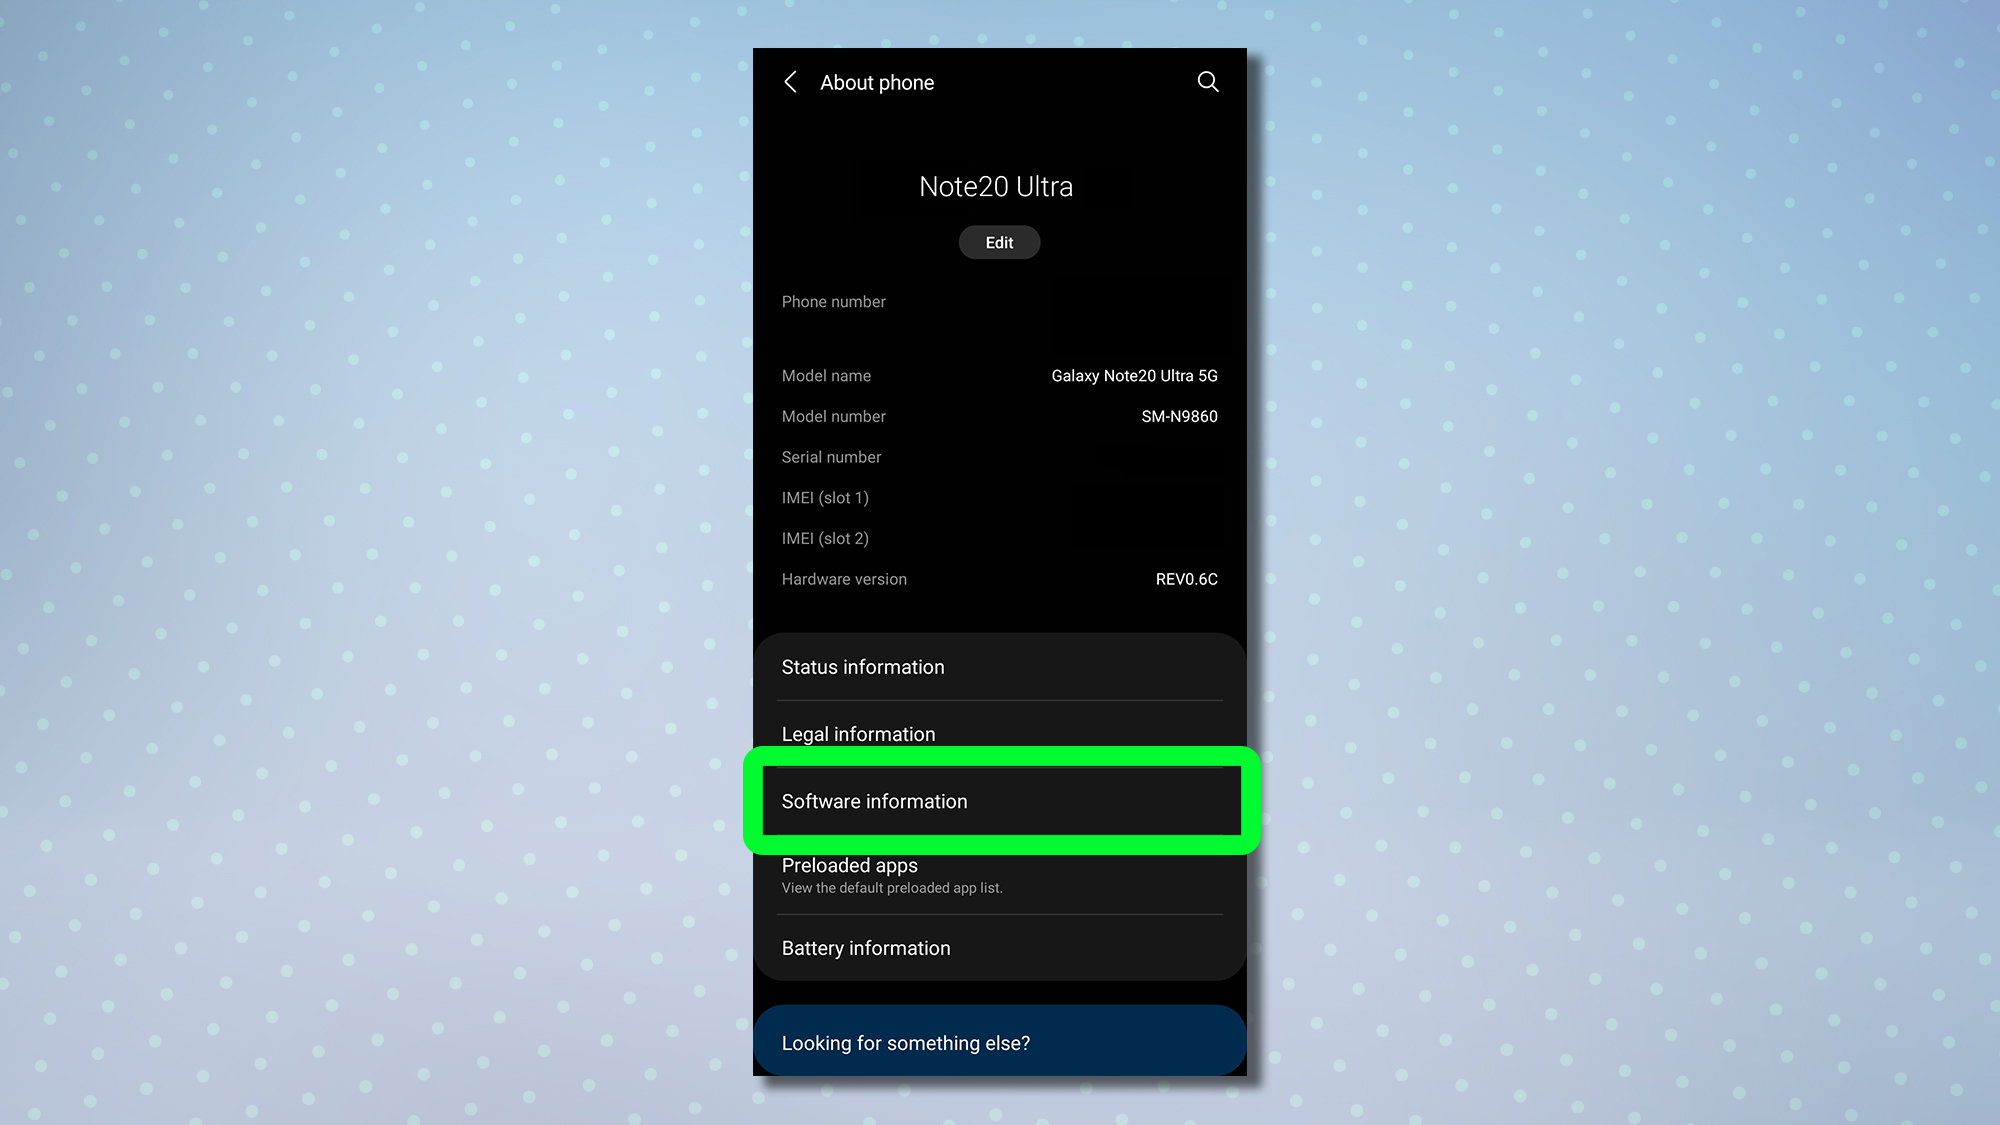 A screenshot showing the Android about phone menu